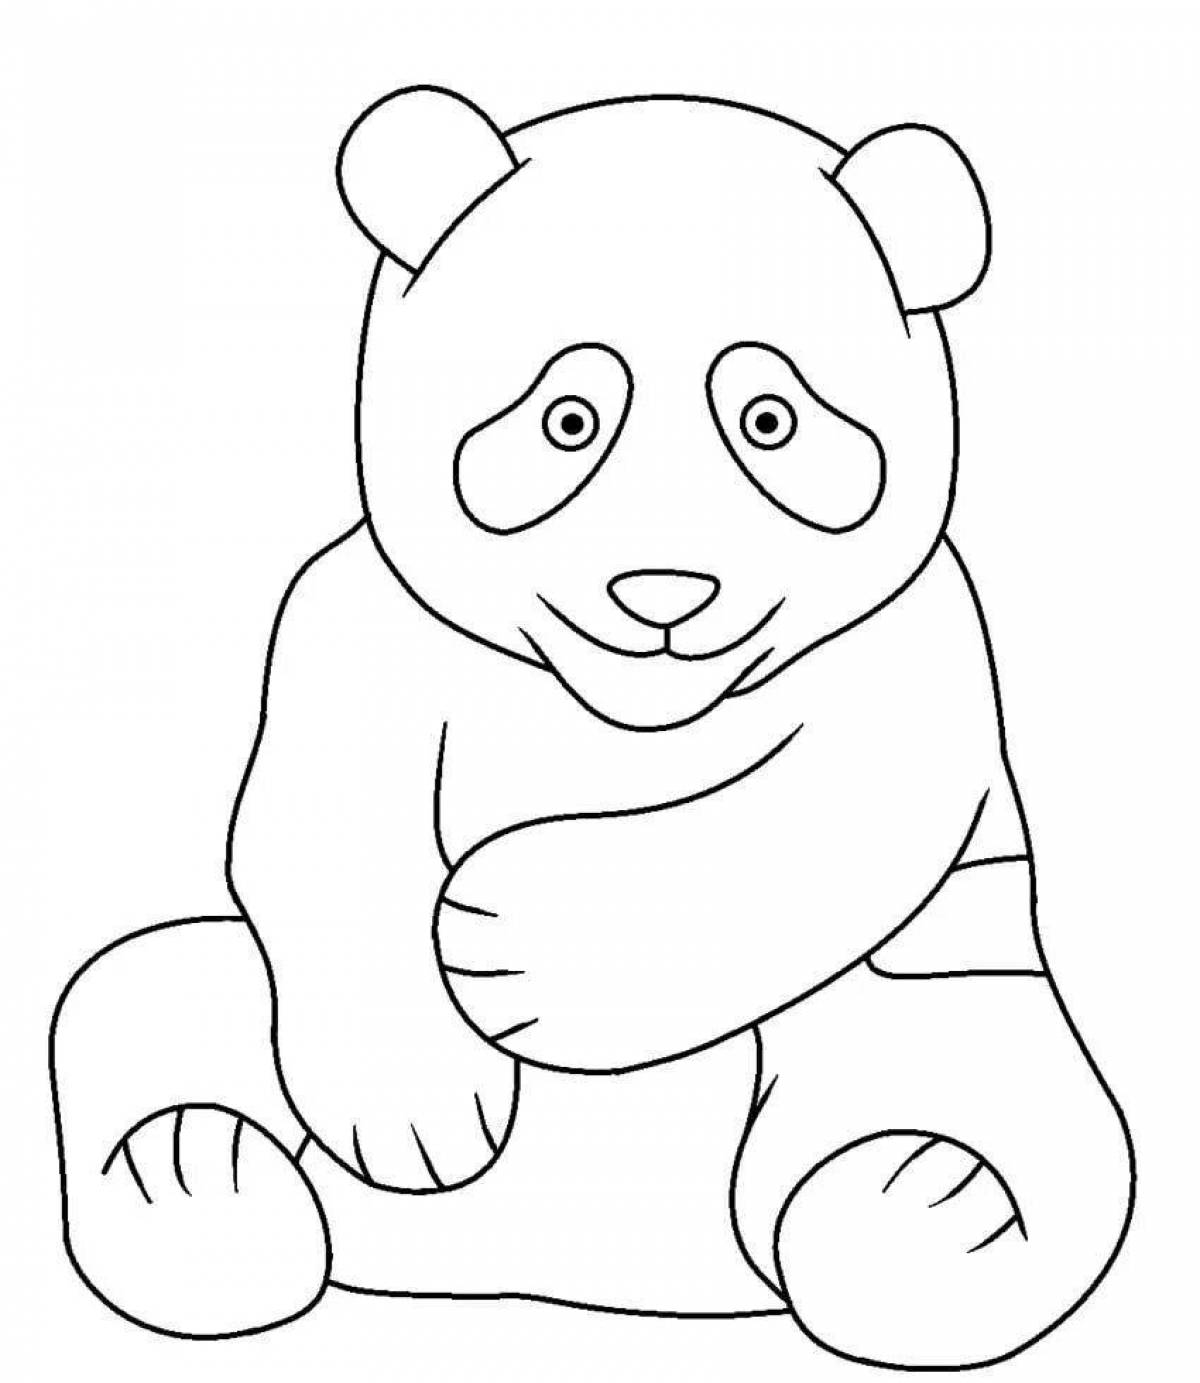 Exciting panda drawing for kids